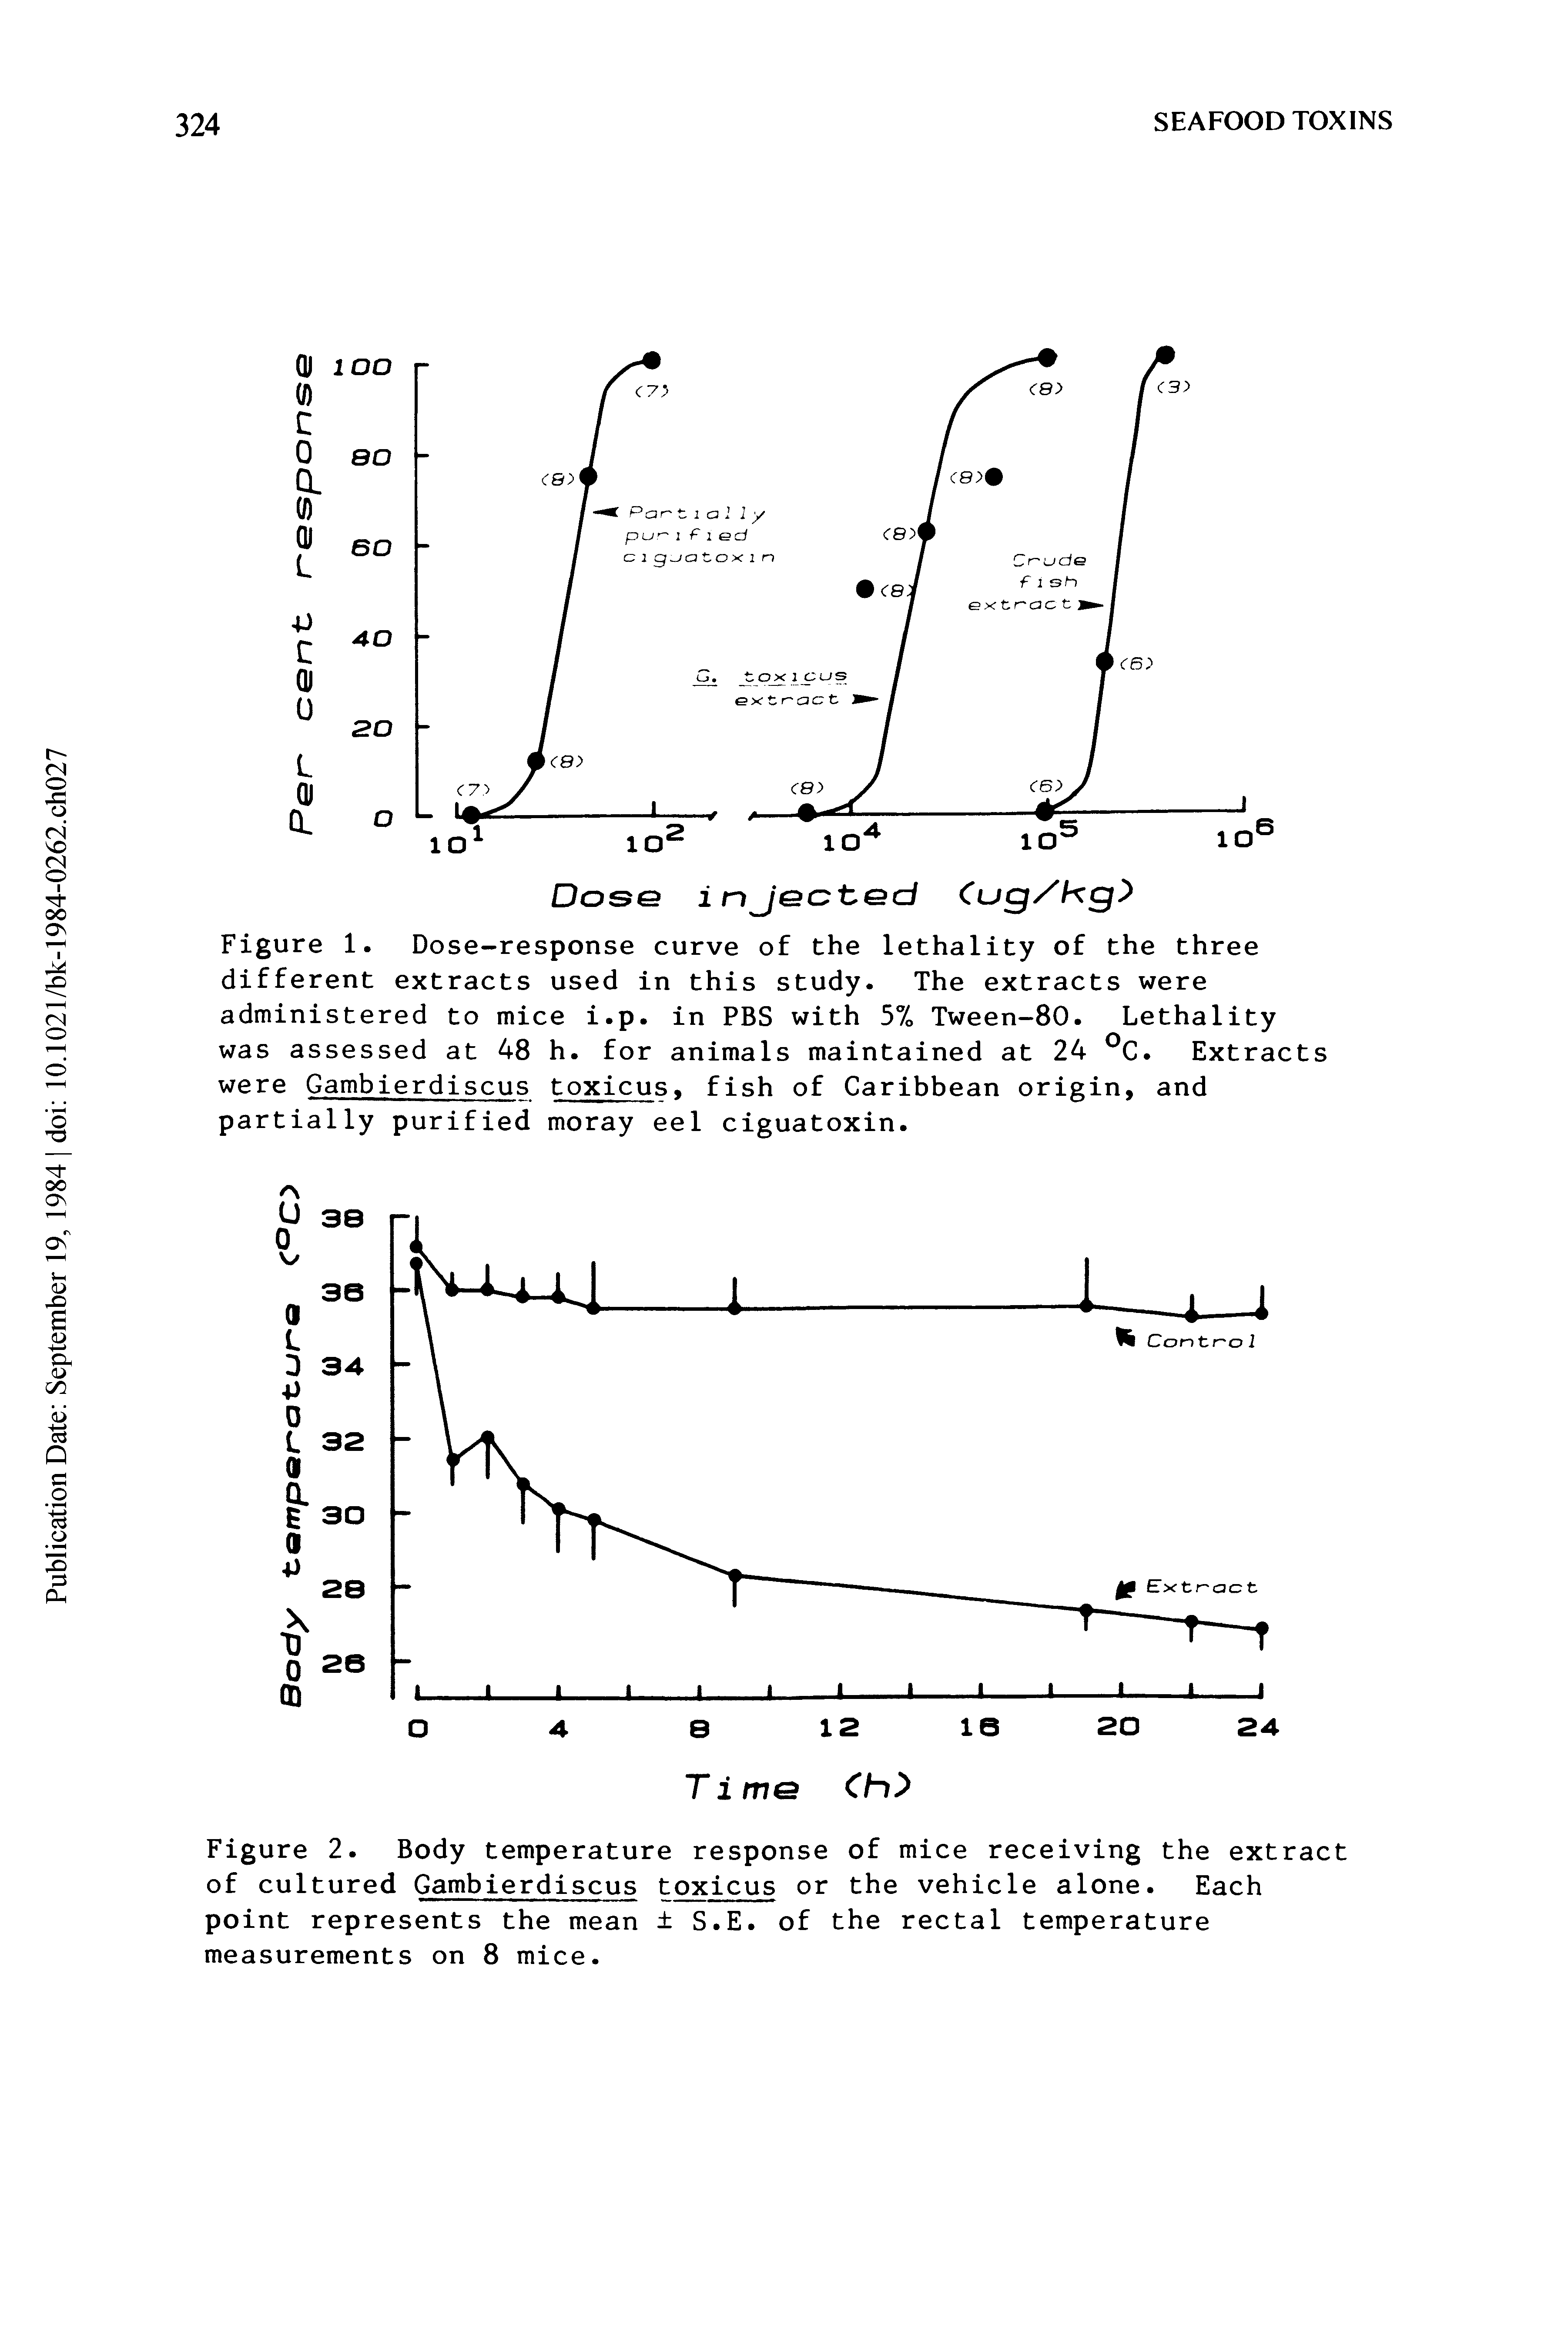 Figure 1. Dose-response curve of the lethality of the three different extracts used in this study. The extracts were administered to mice i.p. in PBS with 57o Tween-80. Lethality was assessed at 48 h. for animals maintaine d at 24 C. Extracts were Gambierdiscus toxicus, fish of Caribbean origin, and partially purified moray eel ciguatoxin.